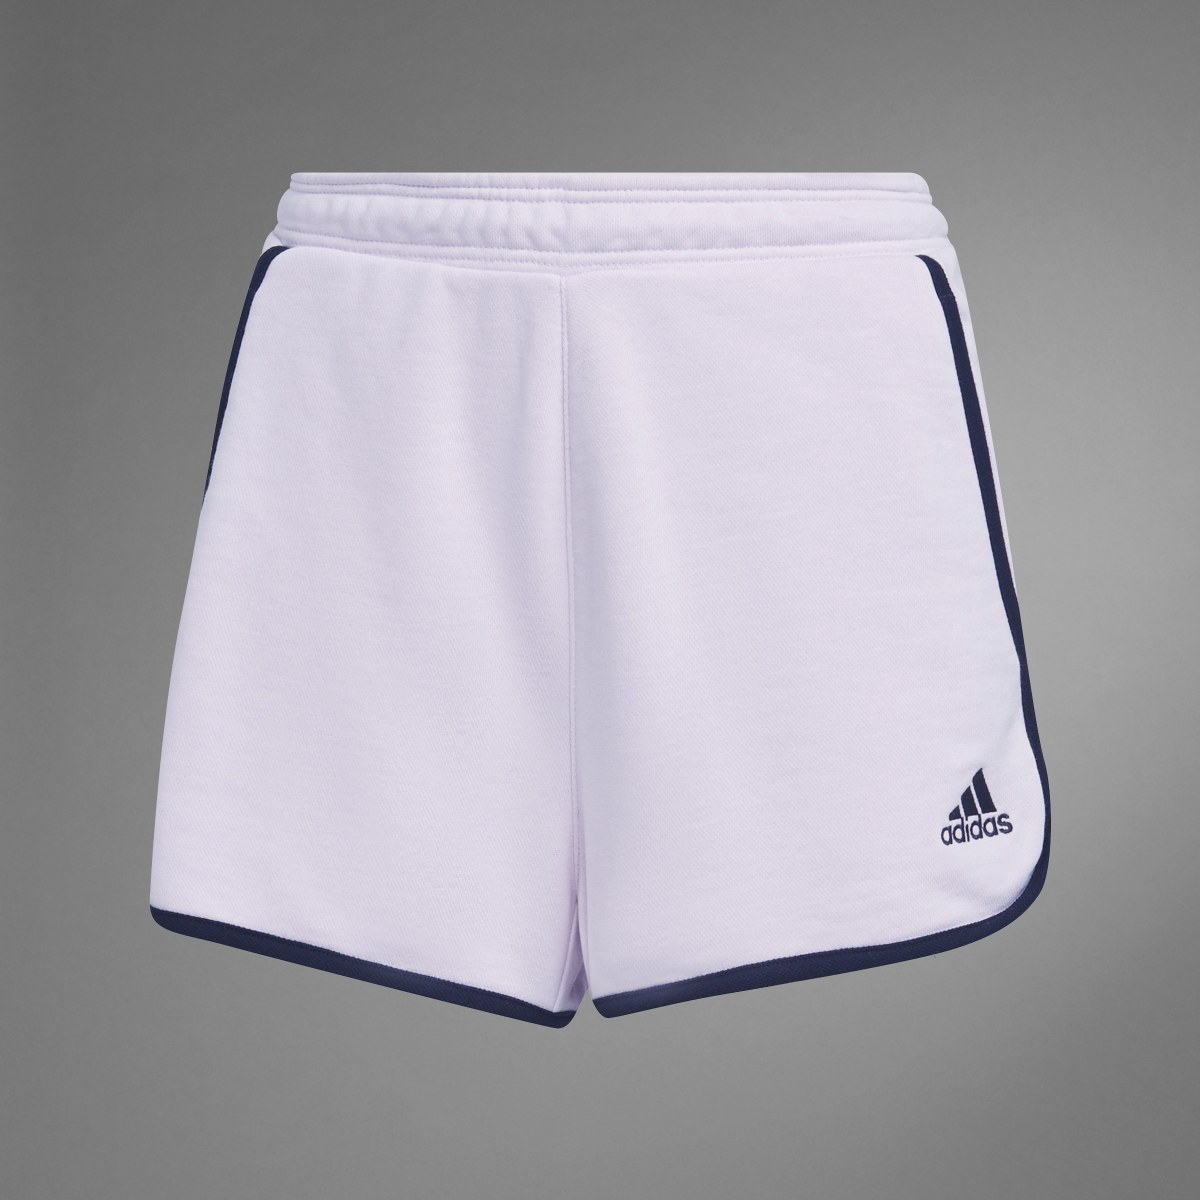 Adidas French Terry High-Rise Shorts. 10